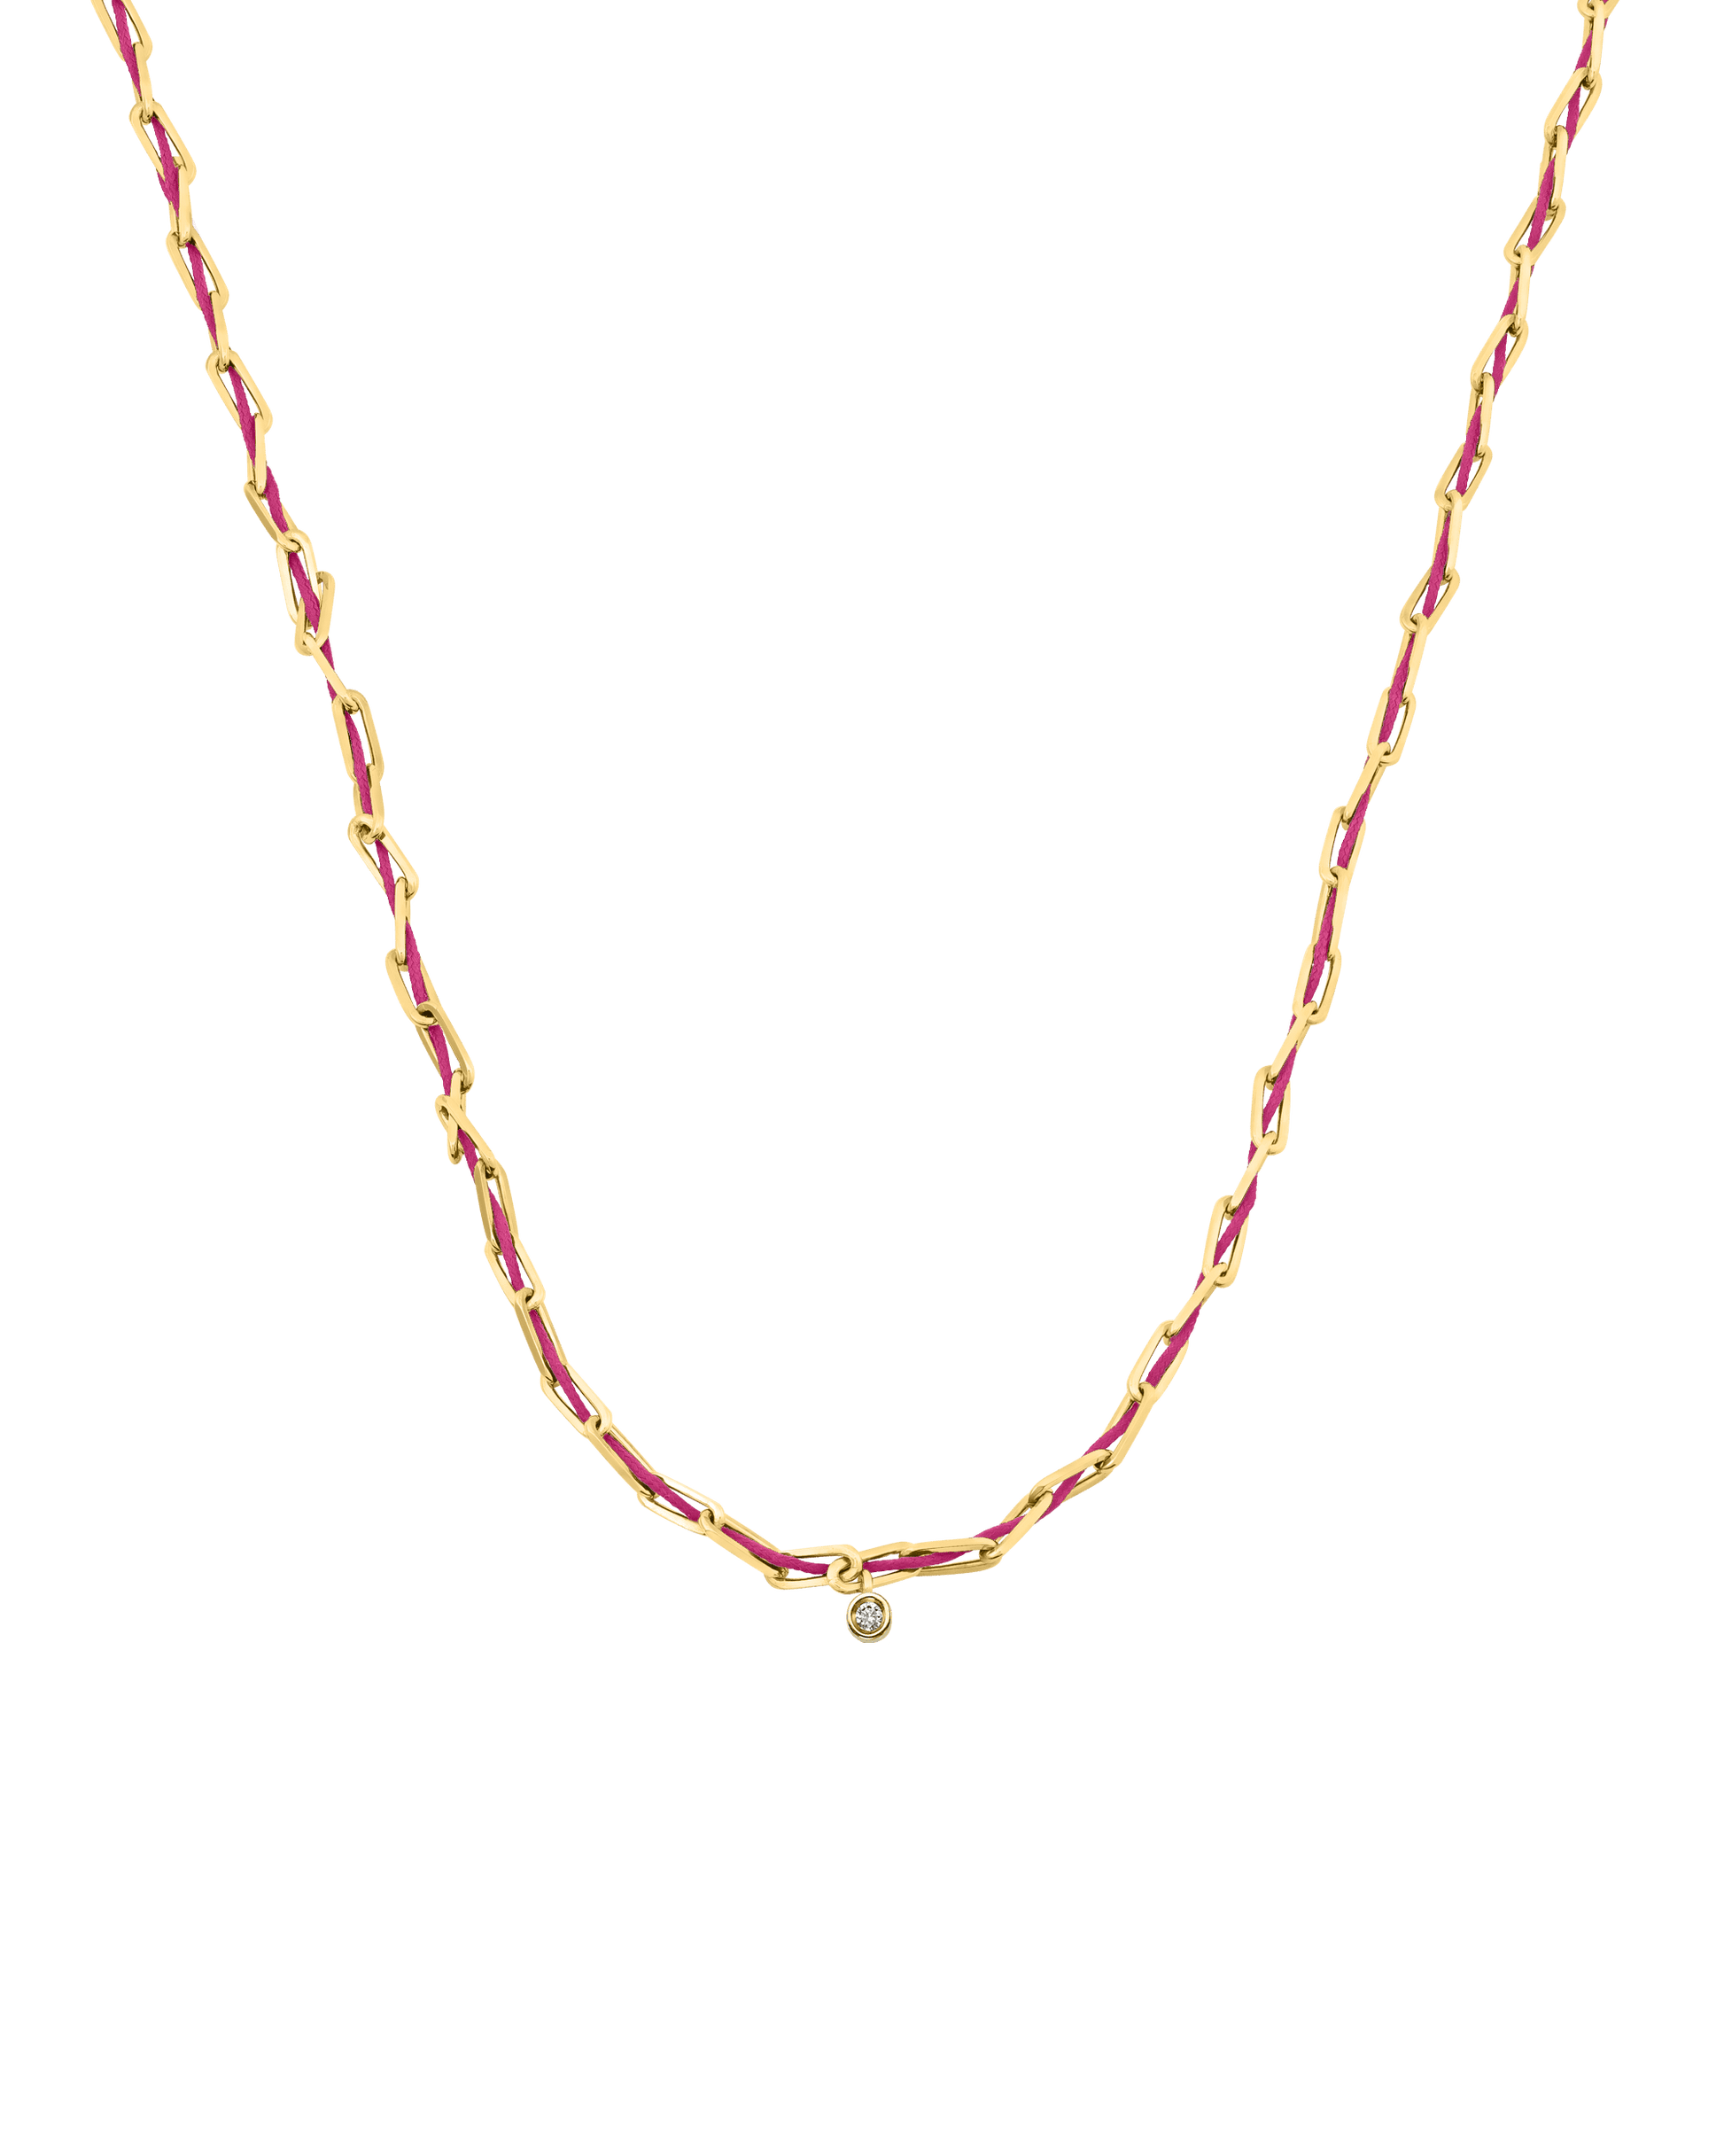 Pink : Twine Diamond Necklace - 18K Gold Vermeil Necklaces magal-dev Fuchsia Small: 0.03ct 16"